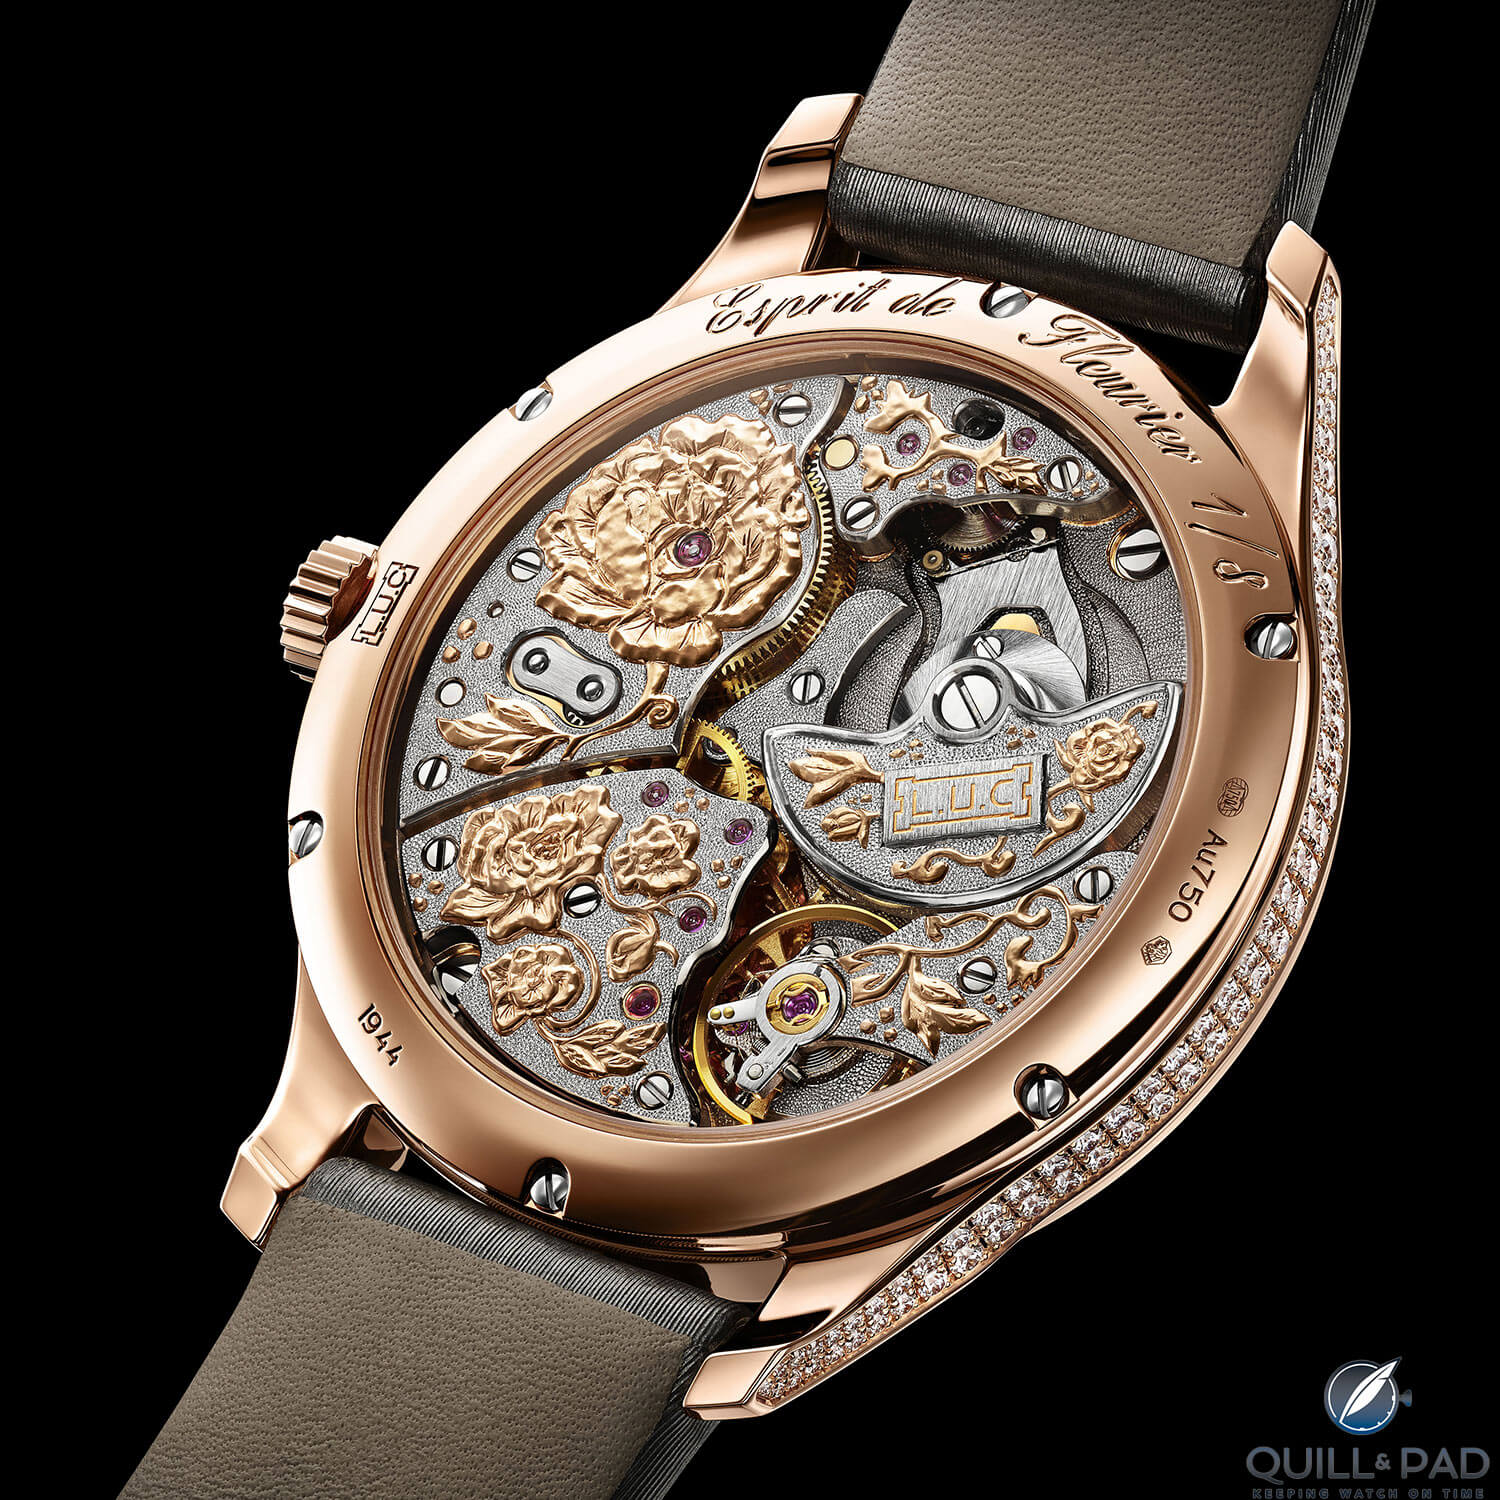 The beautifully decorated micro-rotor powered movement of the Chopard L.U.C XP Esprit de Fleurier Peony